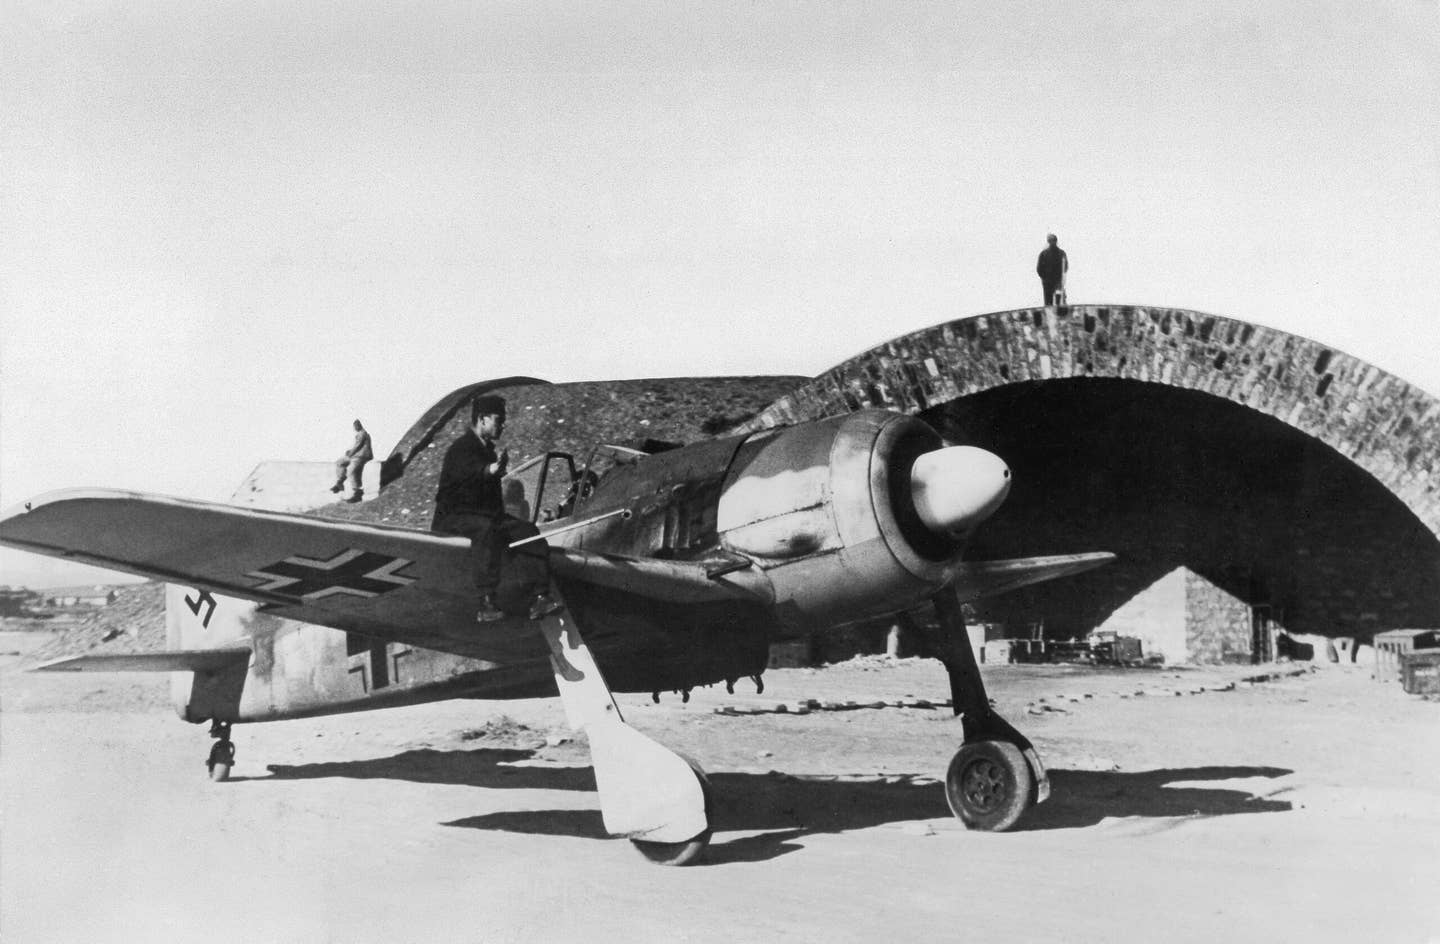 A Luftwaffe Focke-Wulf Fw 190 at its airbase. As of mid-1942, this was the most potent German fighter in large-scale service and a major threat to the RAF. <em>Photo by Weltbild/ullstein bild via Getty Images</em>